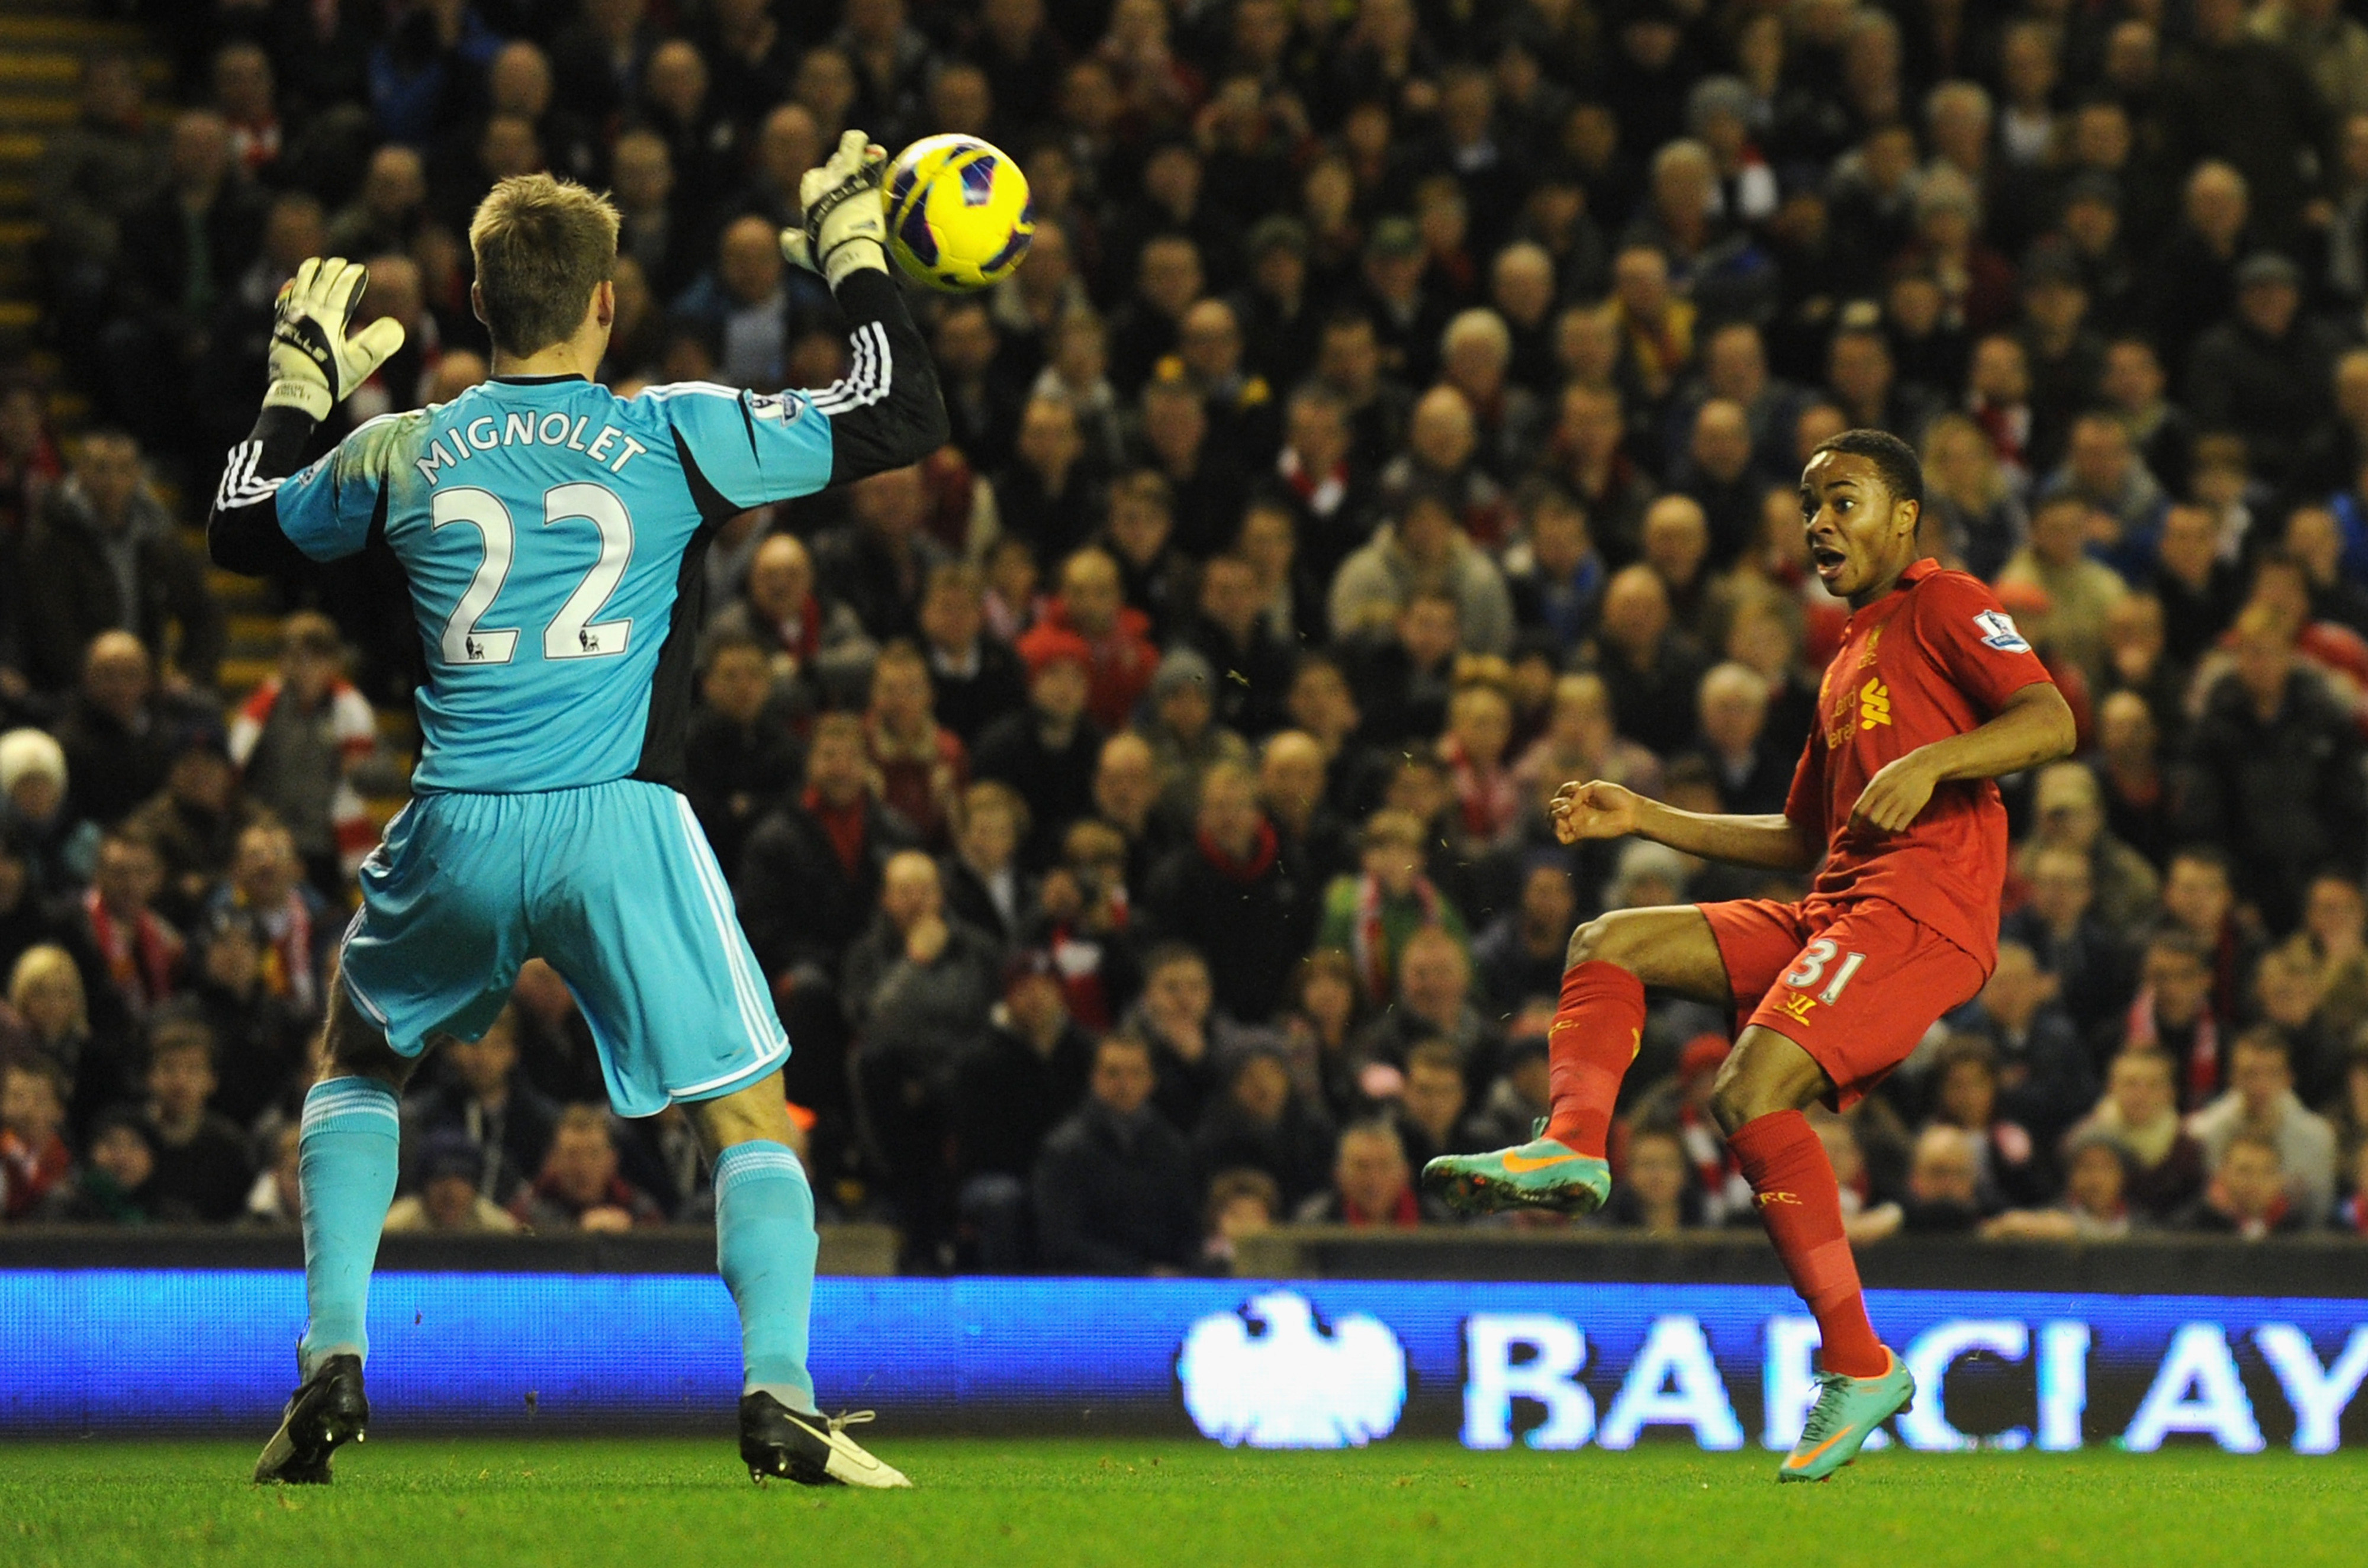 Let's hope Sterling does not score on Mignolet this time.